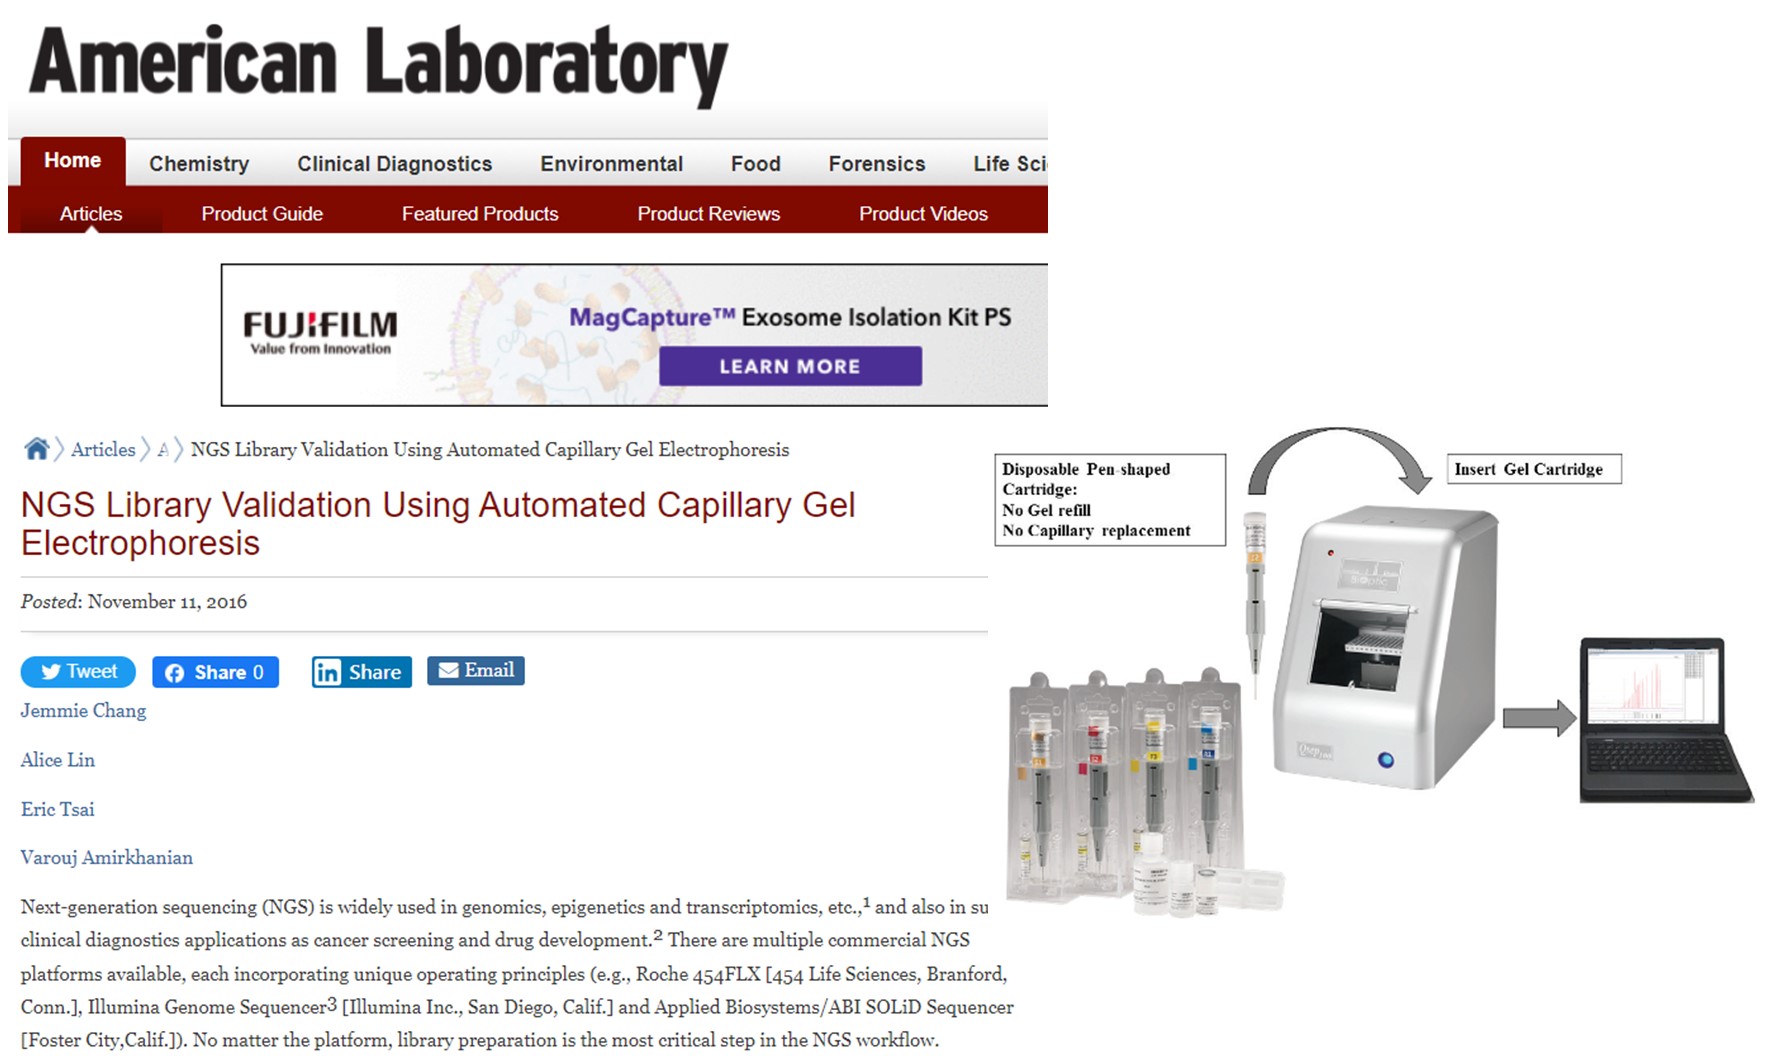 NGS Library Validation Using Automated Capillary Gel Electrophoresis _ American Laboratory